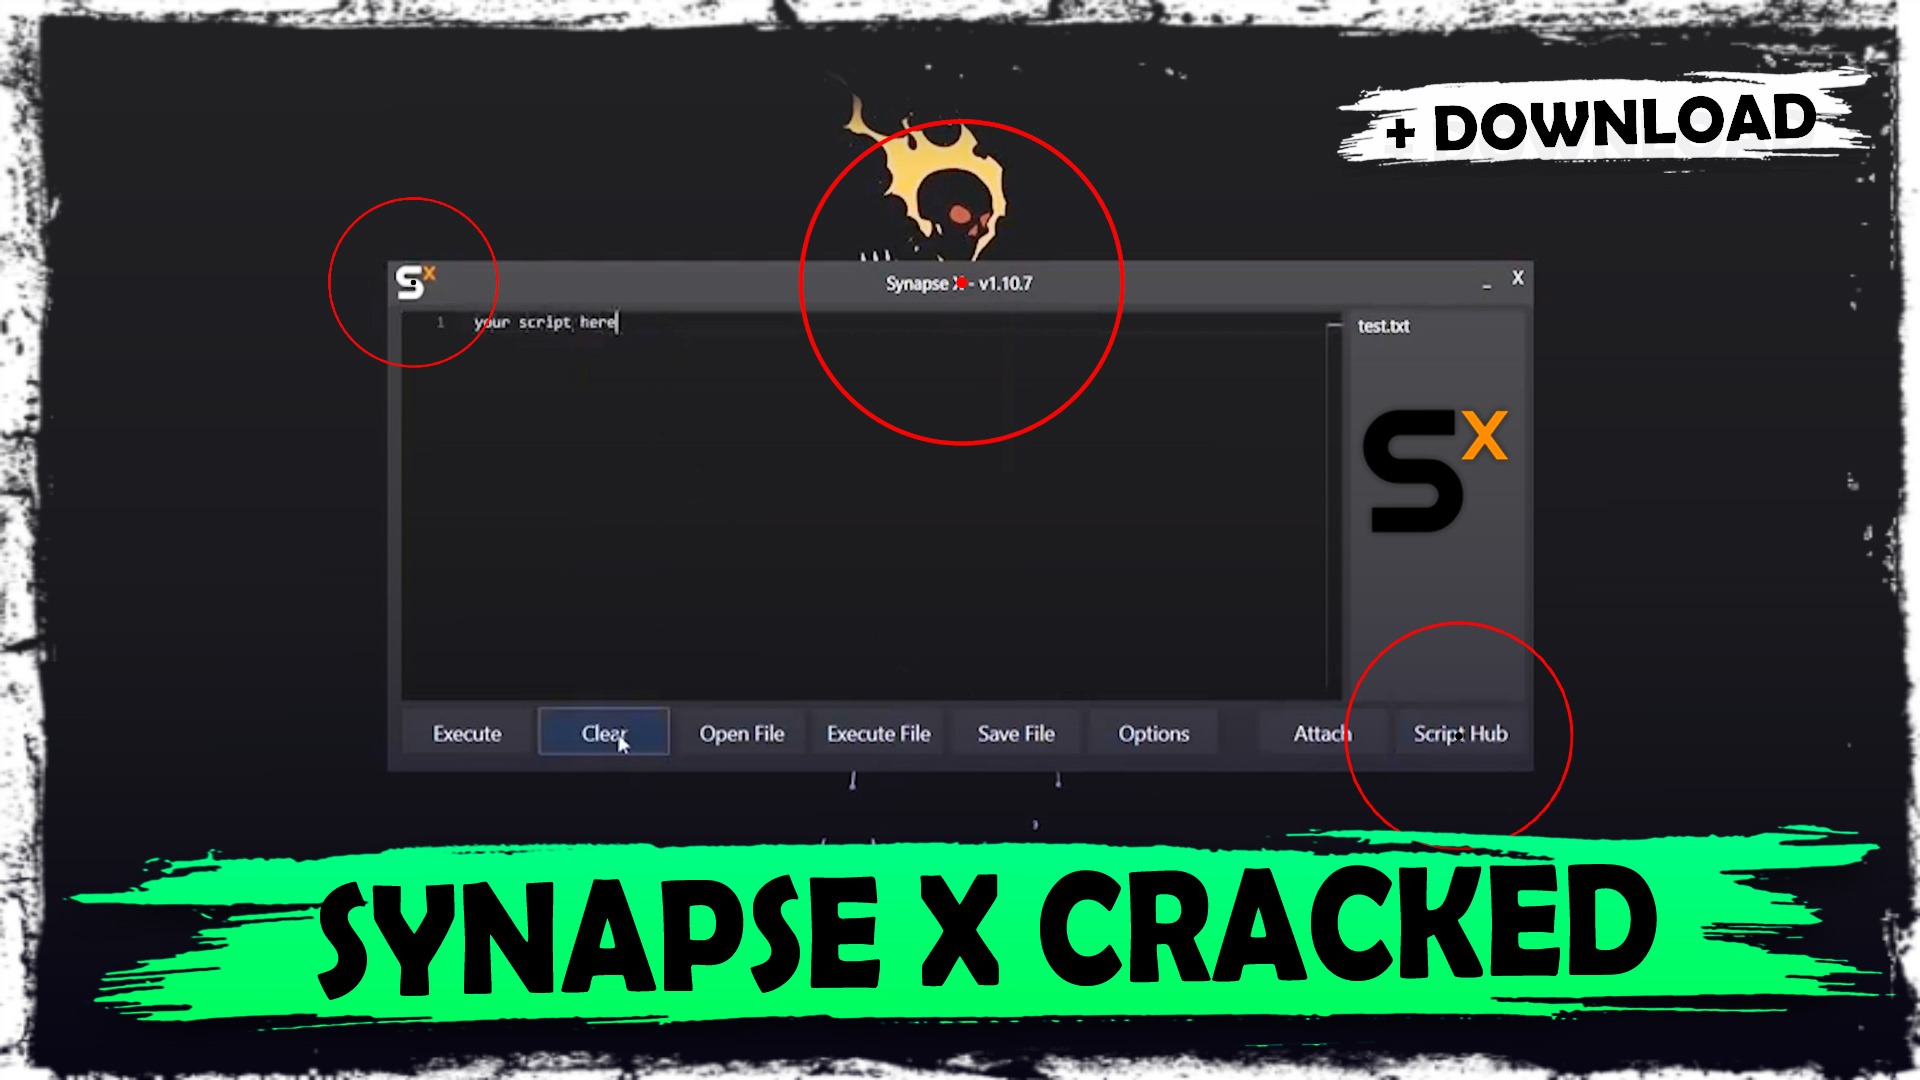 Synapse X Cracked (BEST Working Exploit) – Telegraph